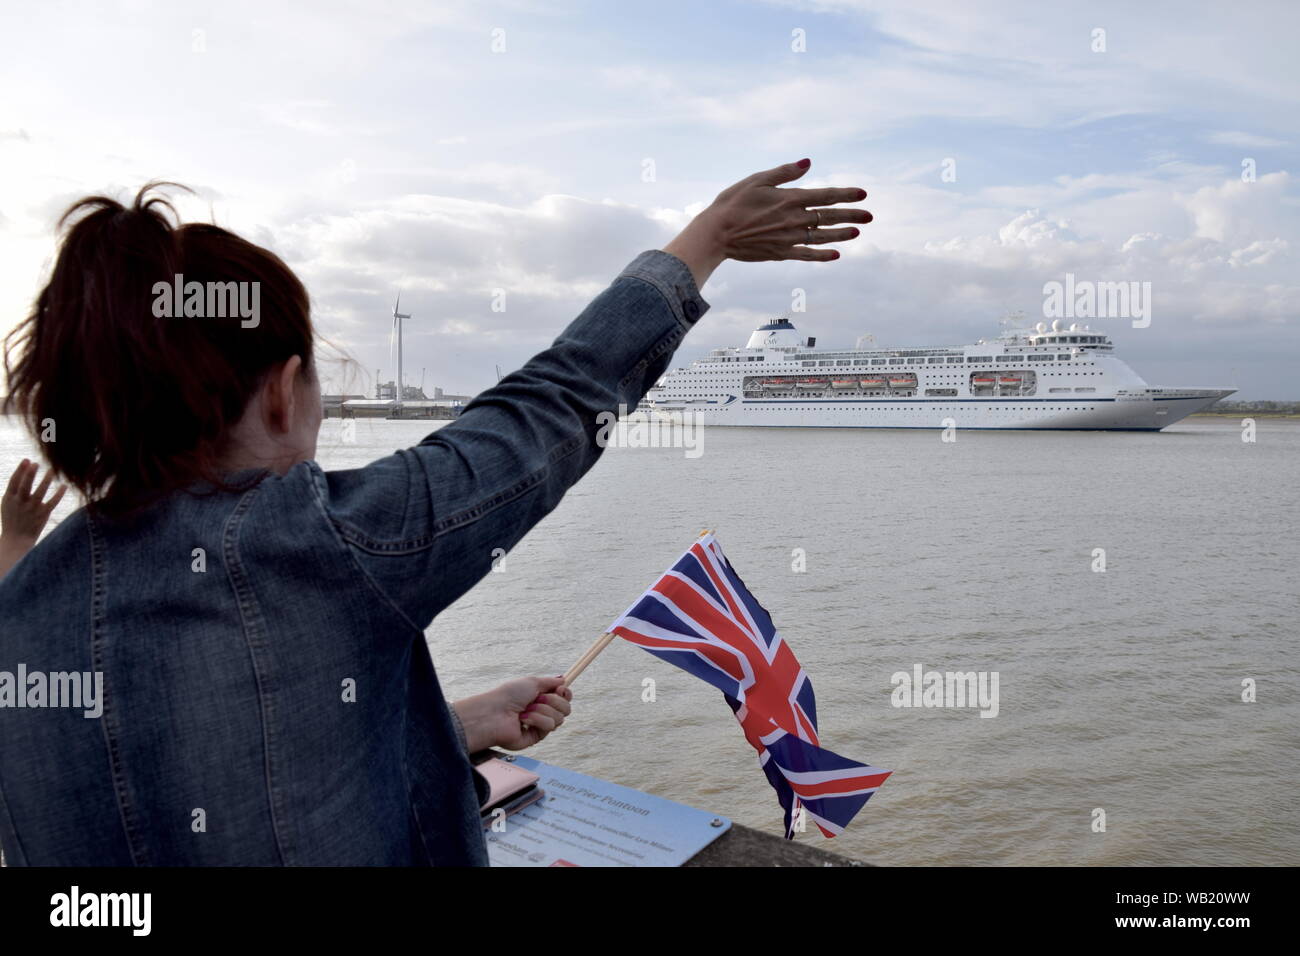 Columbus is a large luxury cruise ship. Onlookers wave goodbye, as she sails from London International Cruise Terminal, Tilbury. Stock Photo